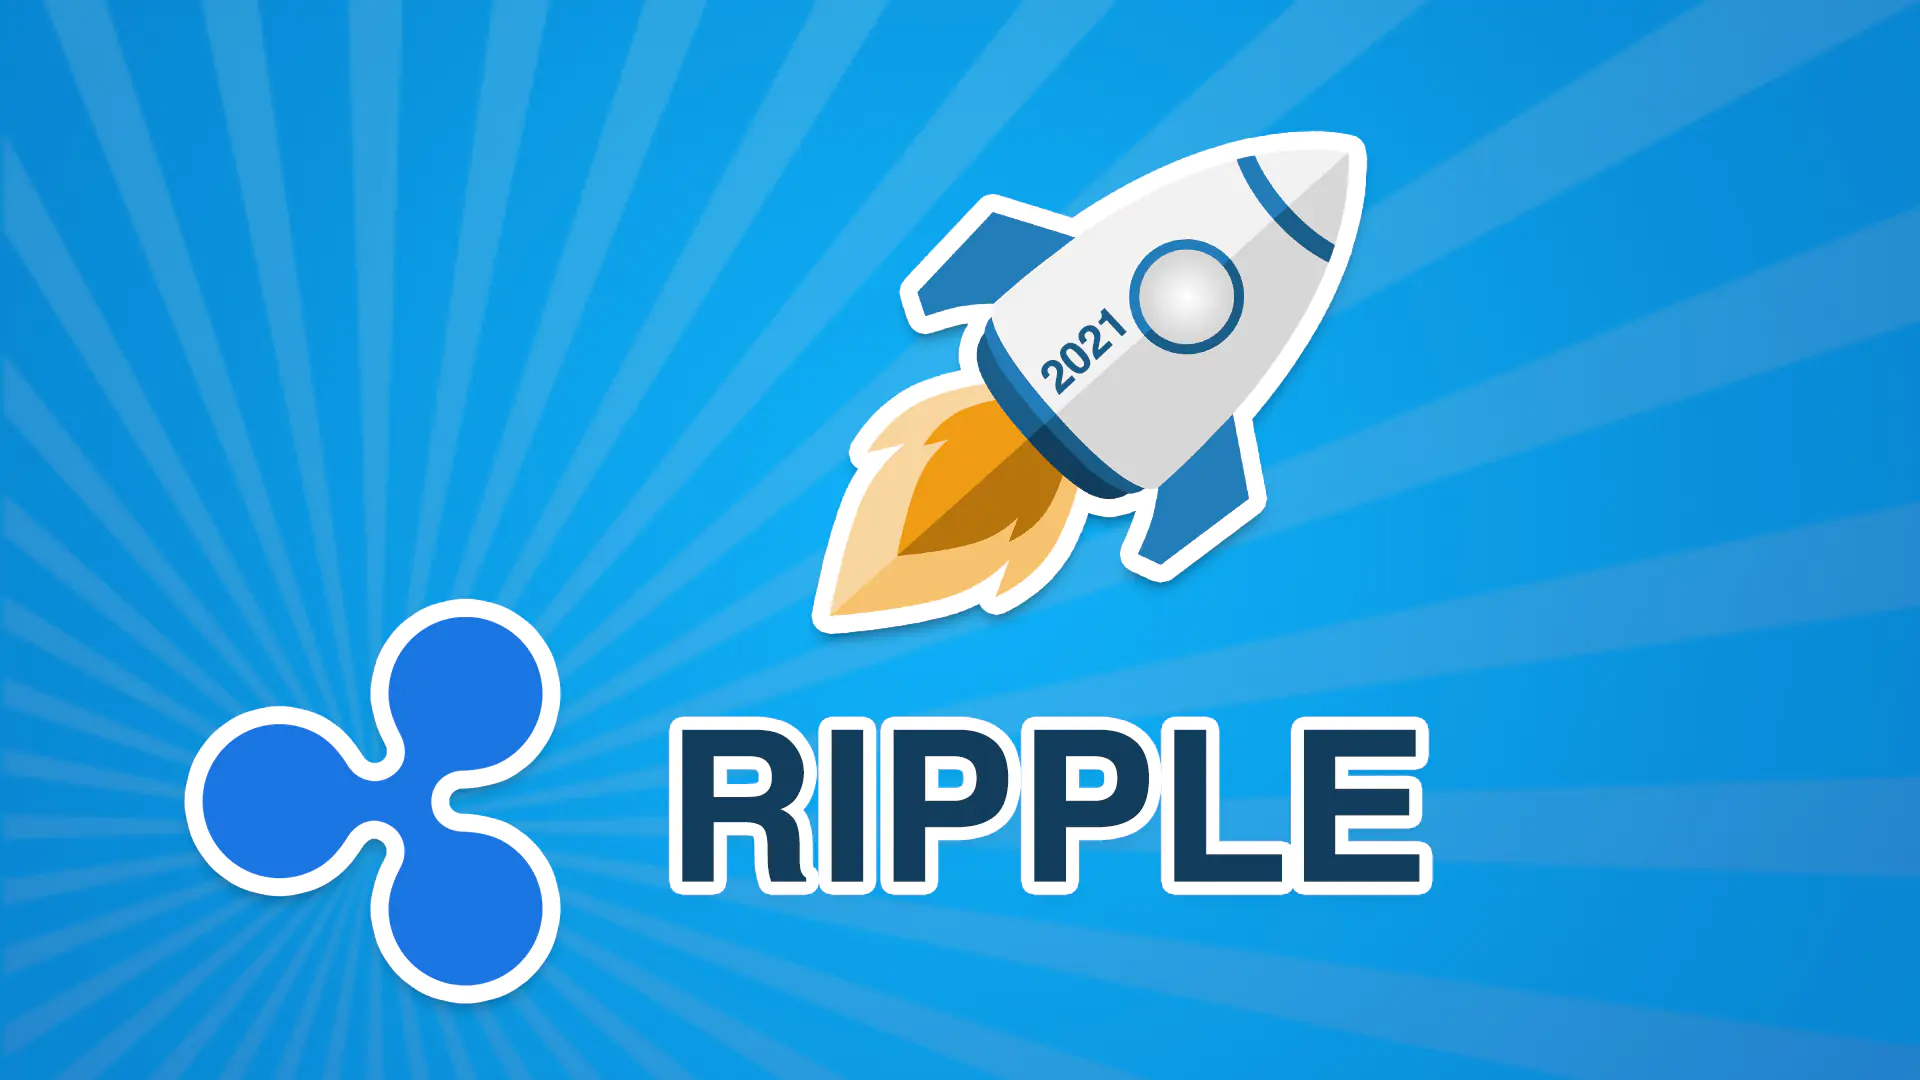 Ripple continues its rise in 2021